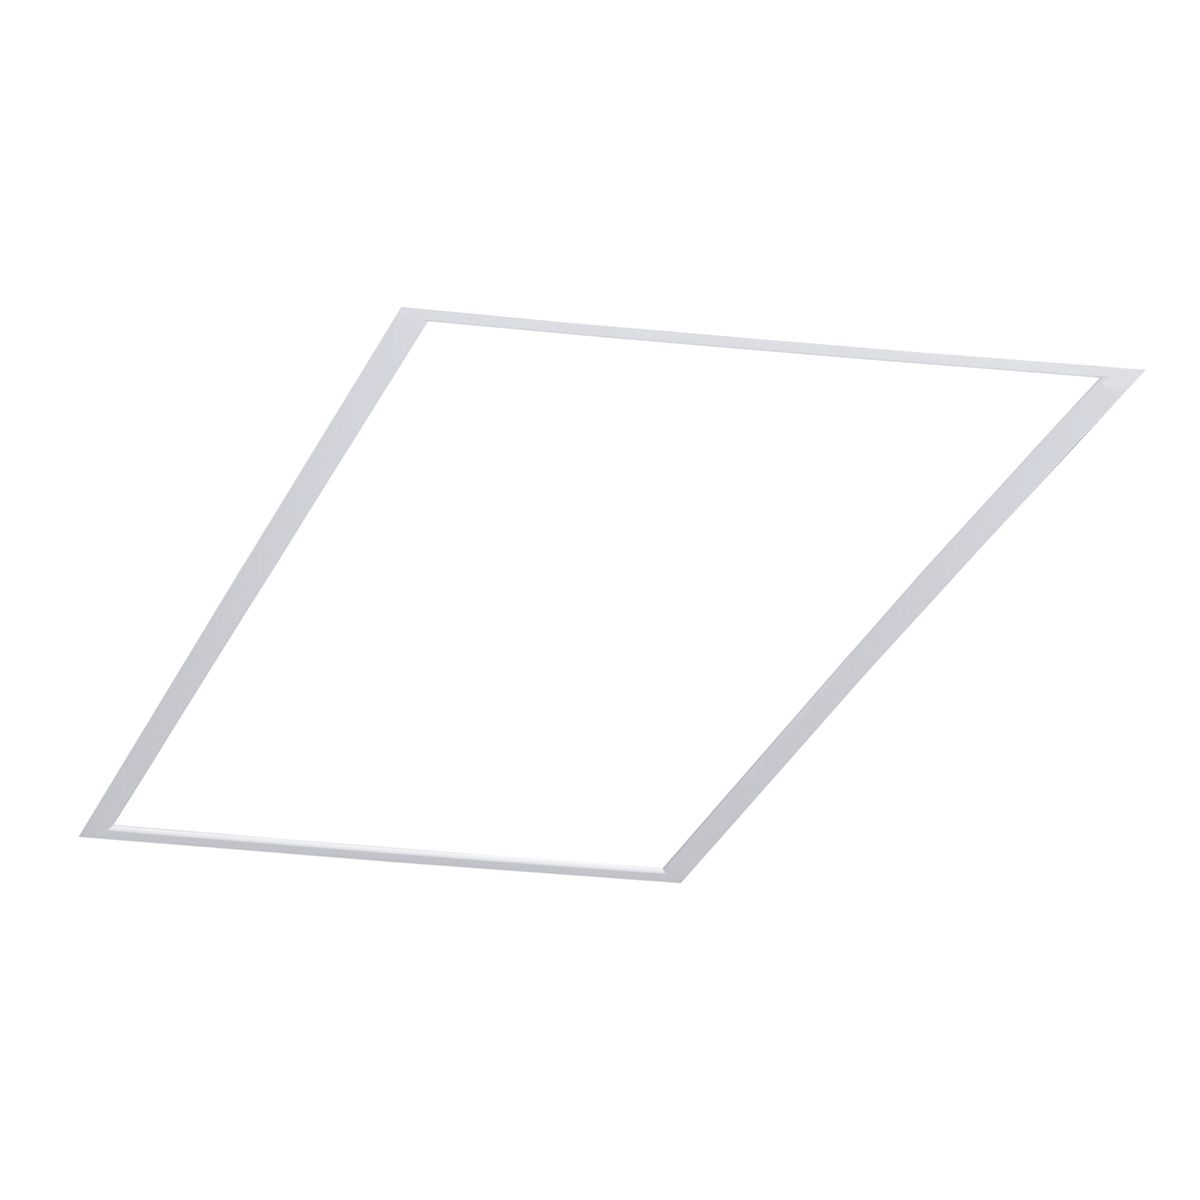 Details about   Box of 10 Blank Hubbel LCFBP14 Scrubshield Plate 